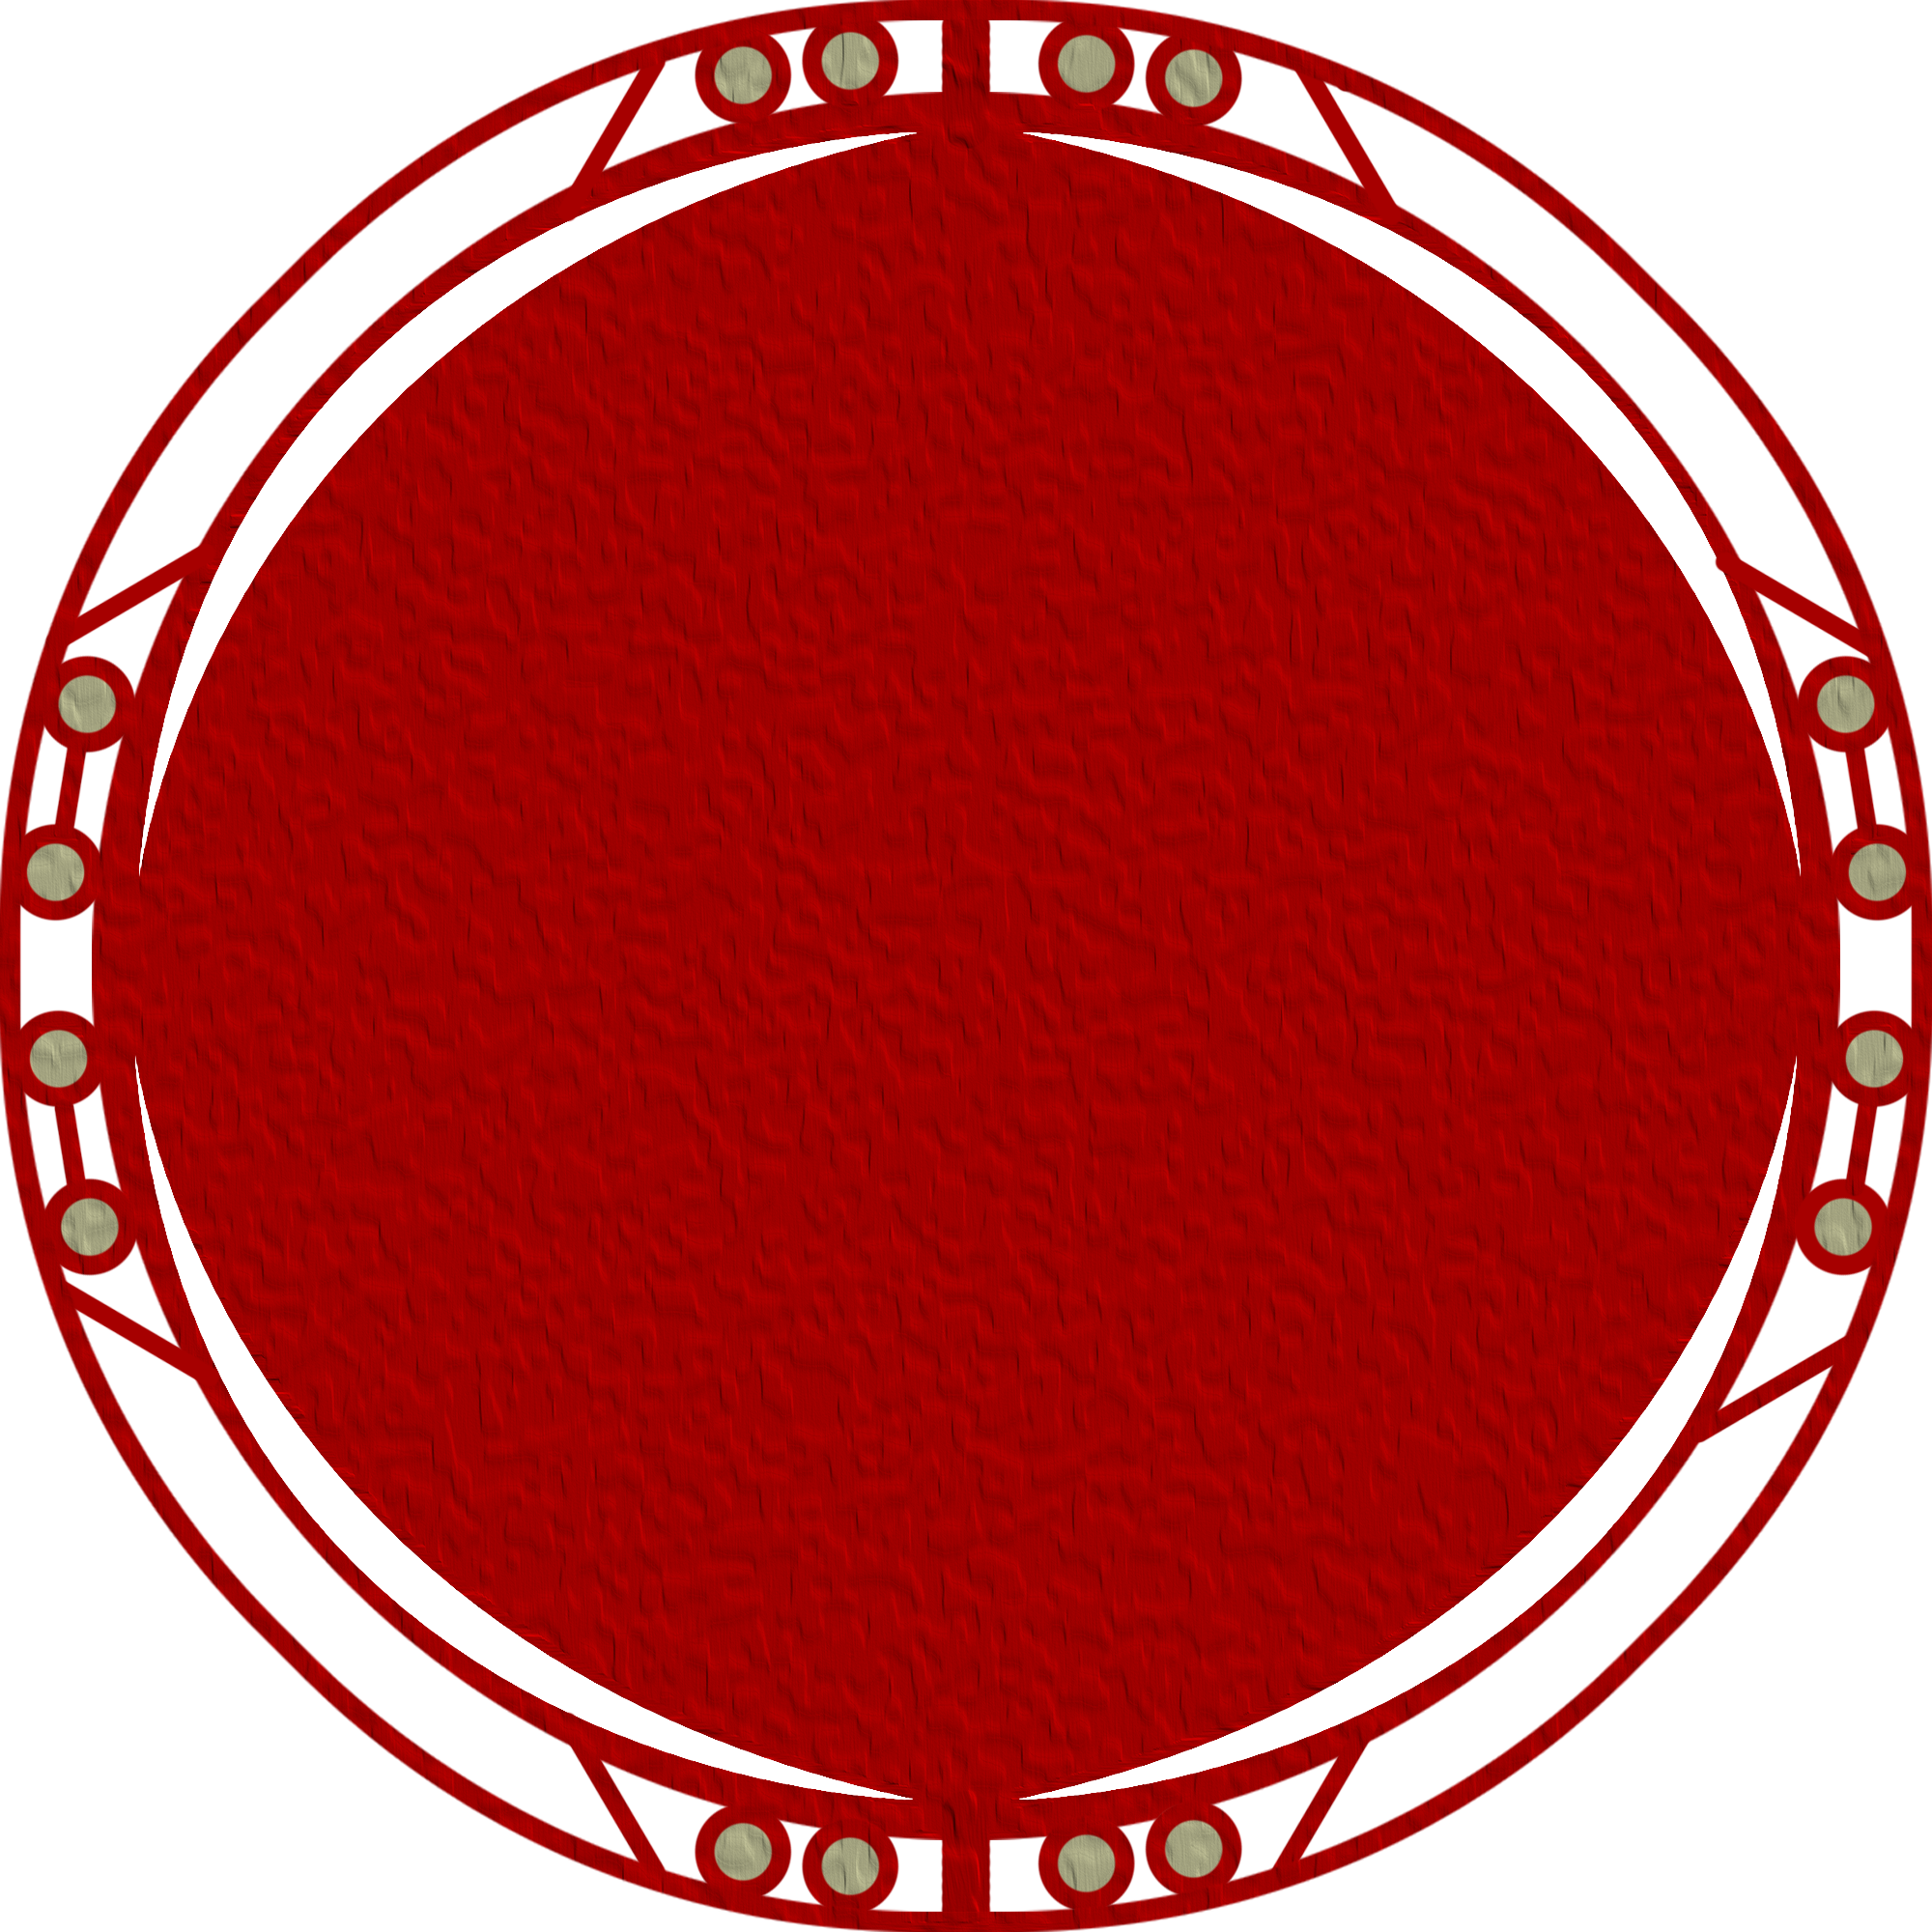 Free Red Oval Png, Download Free Red Oval Png png images, Free ClipArts